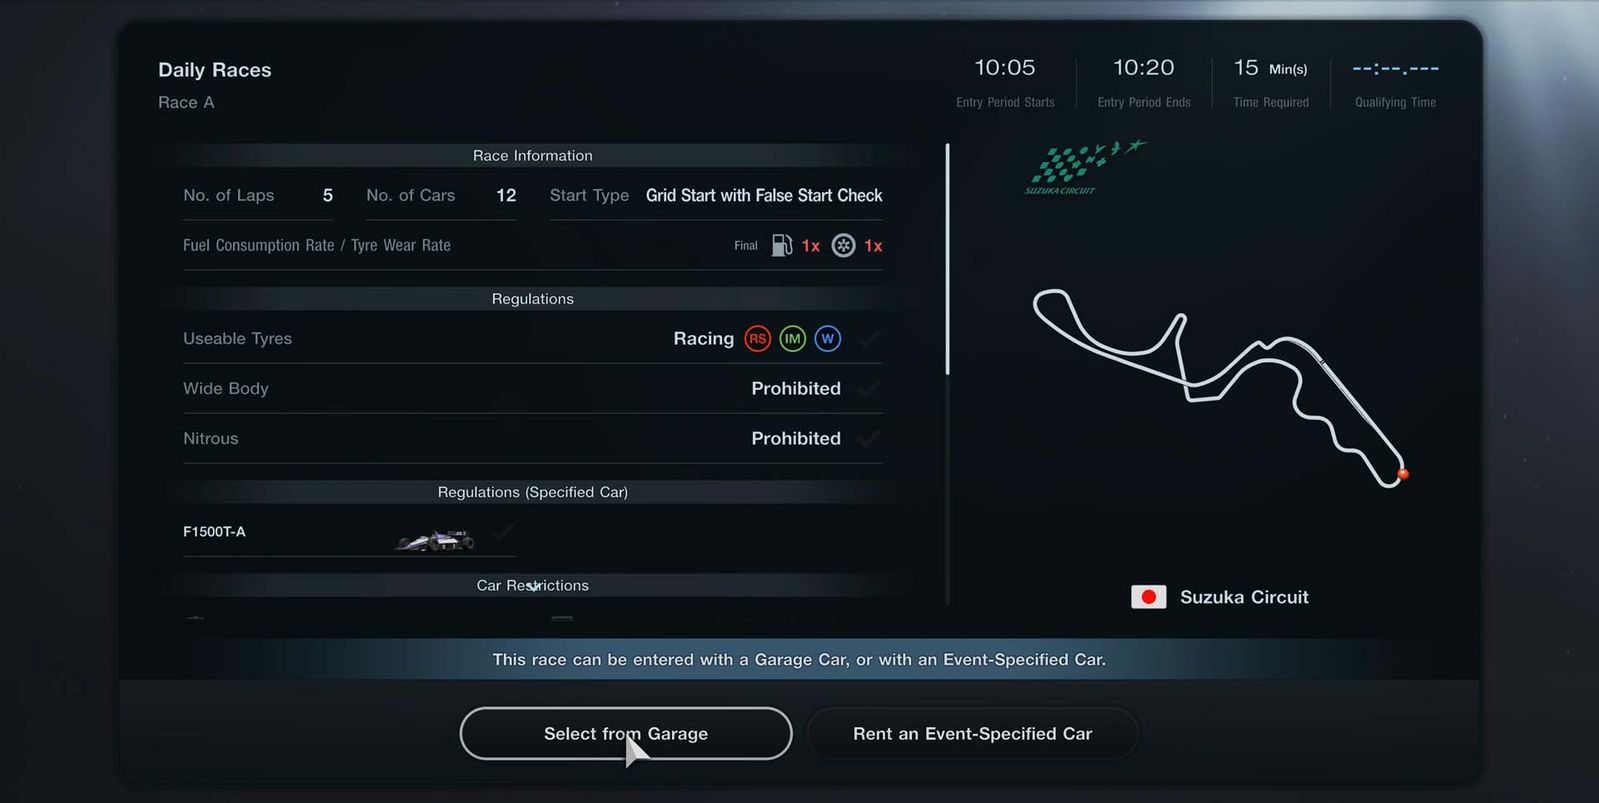 Gran Turismo 7 Daily Races 10 October Race A